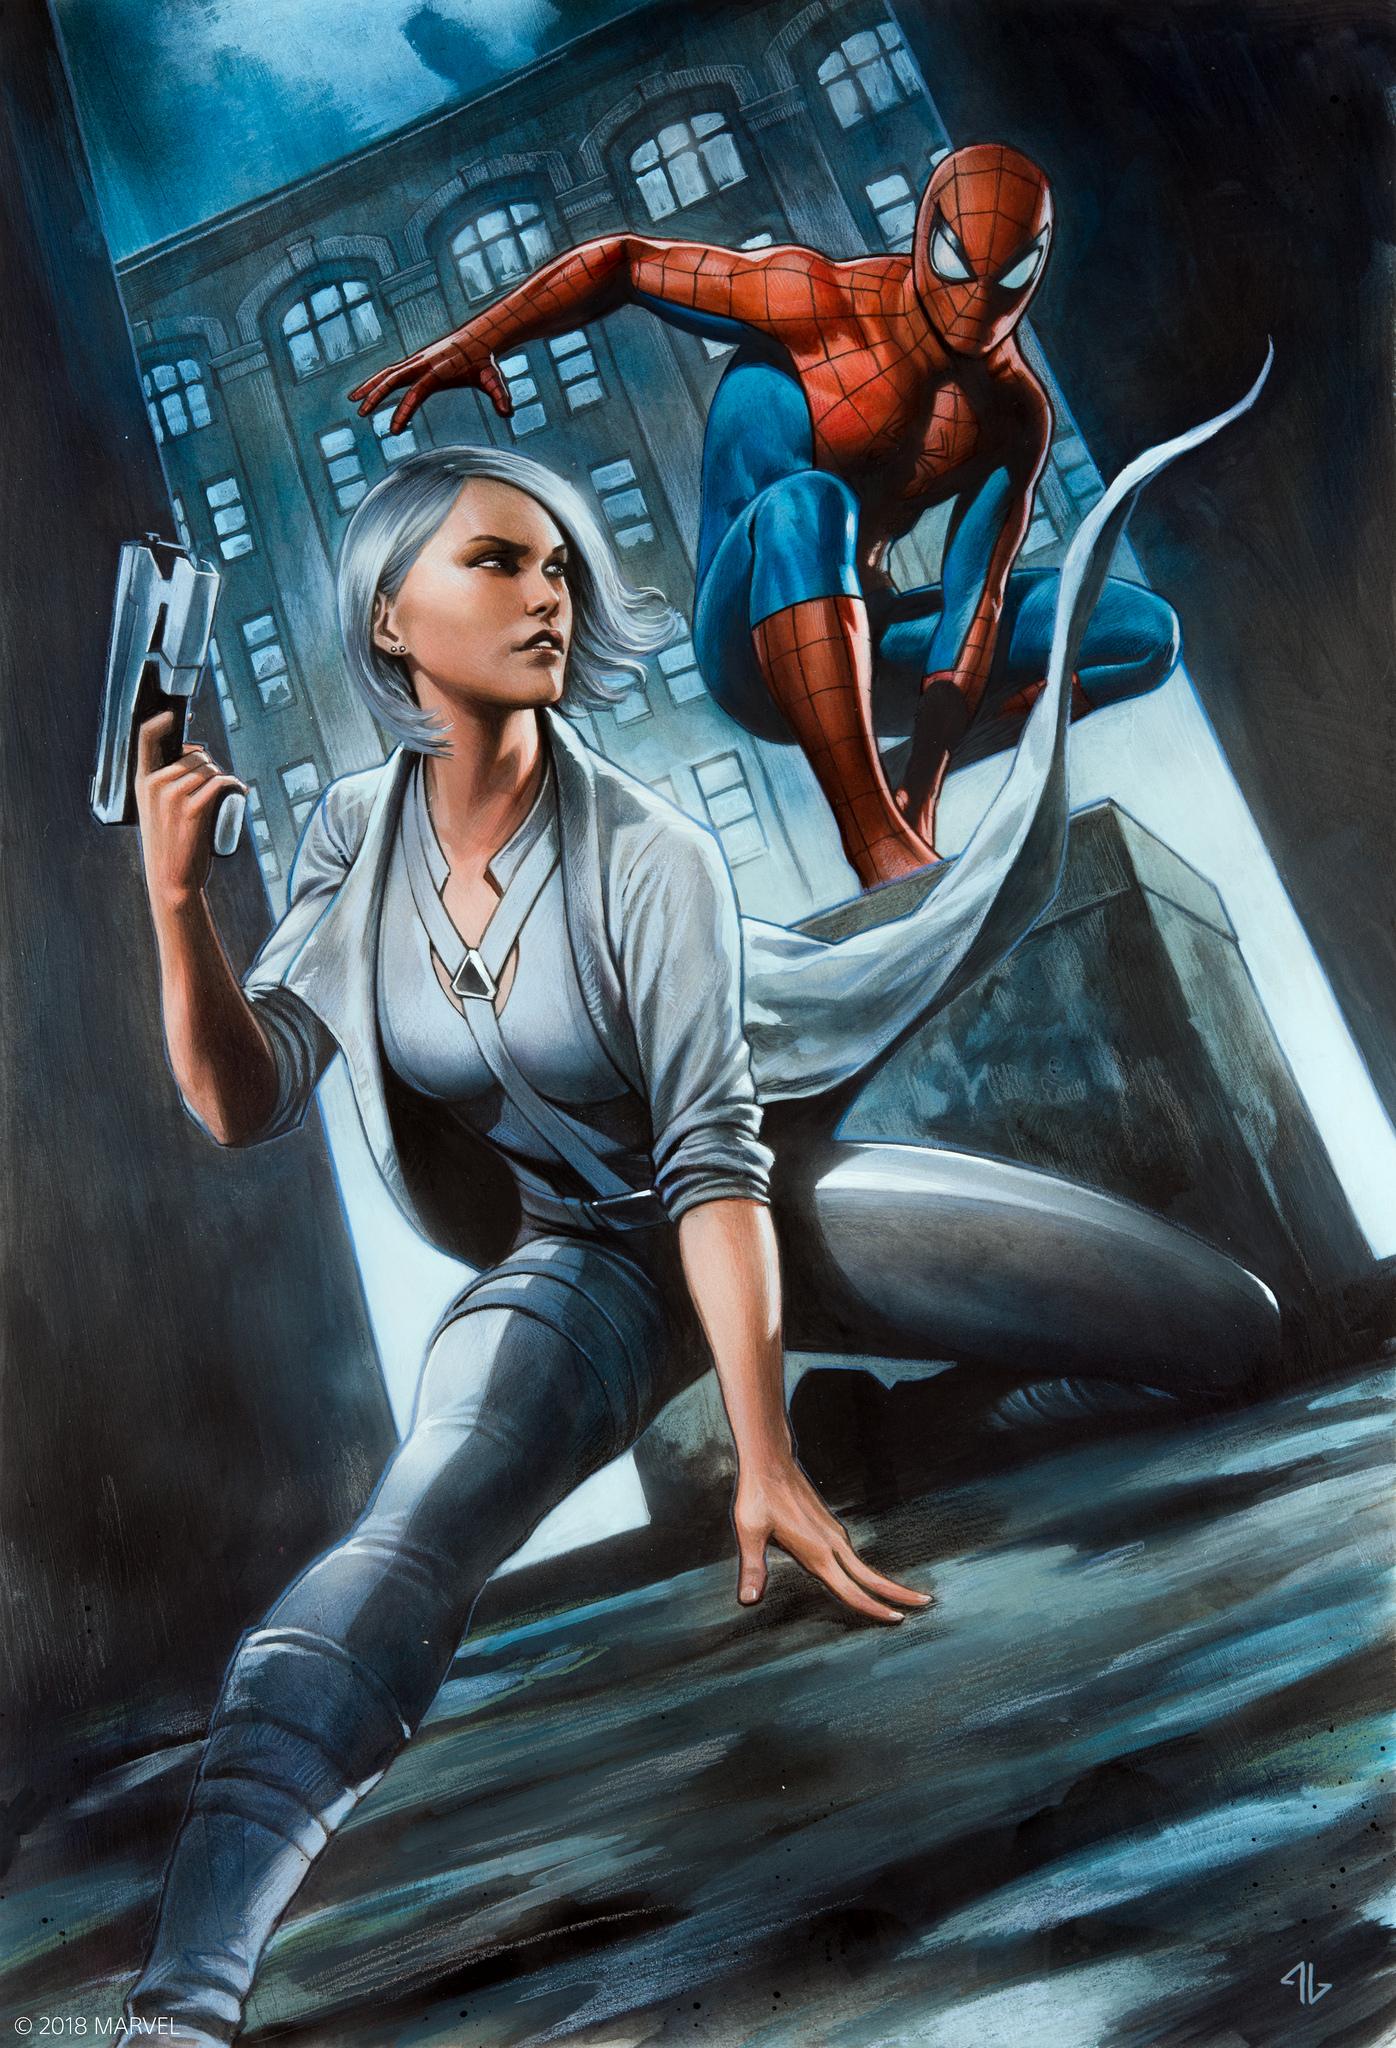 afsked perforere mastermind PlayStation Europe on Twitter: "Silver Sable has returned, and she wants  her stuff back. Marvel's Spider-Man: Silver Lining launches on 21st  December, only on PS4: https://t.co/ezwnRLrH4J #SpiderManPS4  https://t.co/Af6Ct2Wttw" / Twitter